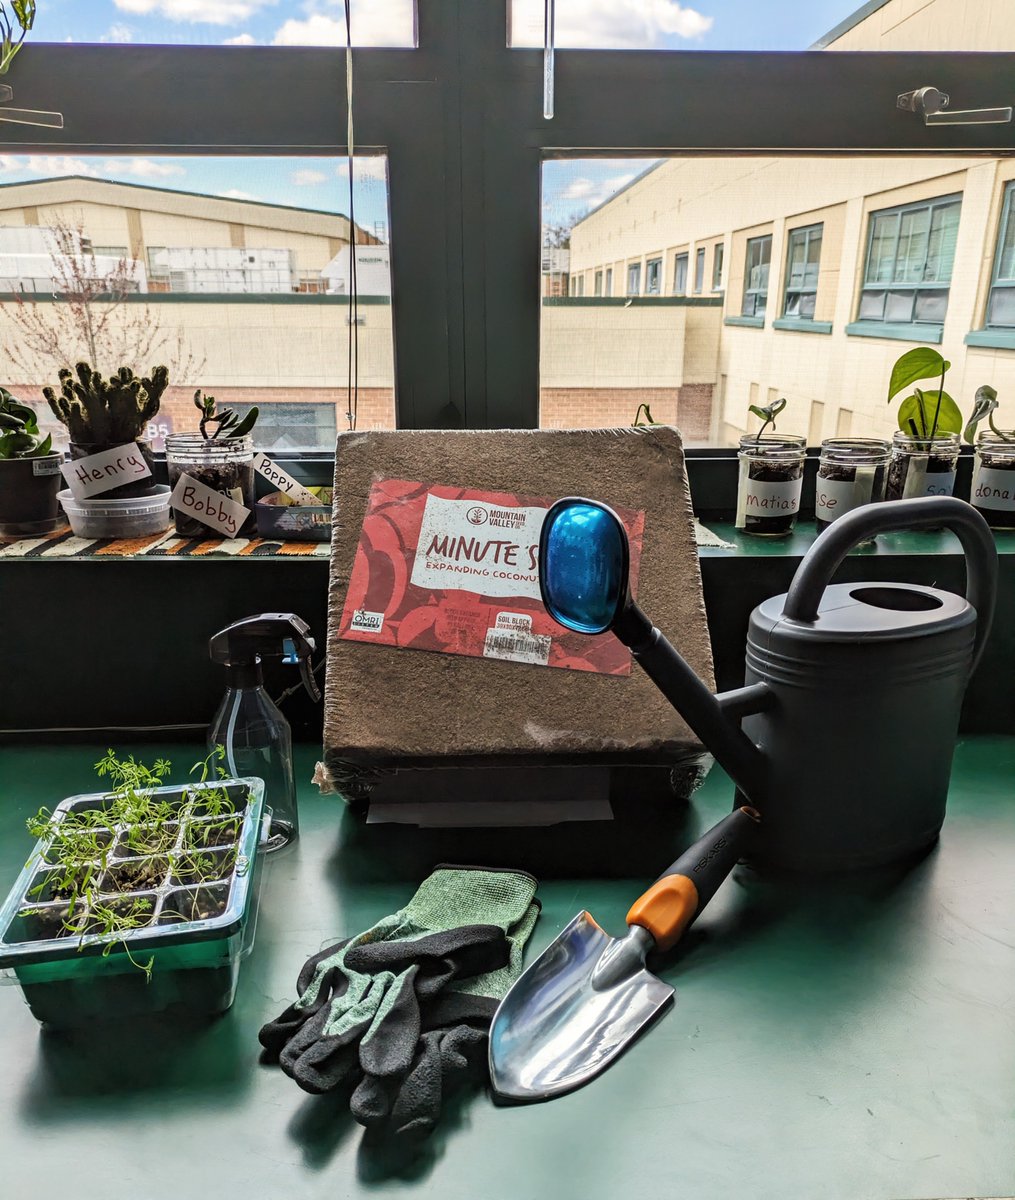 Mrs. Keplinger and her group of students are getting ready for their spring garden! 🌸 We are preparing the beds with native wildflower seeds from @nativewildflowersnursery18 Excited to attract pollinators and make Gunston's landscape even more inviting!🌼🦋🌿 @CRJEducation